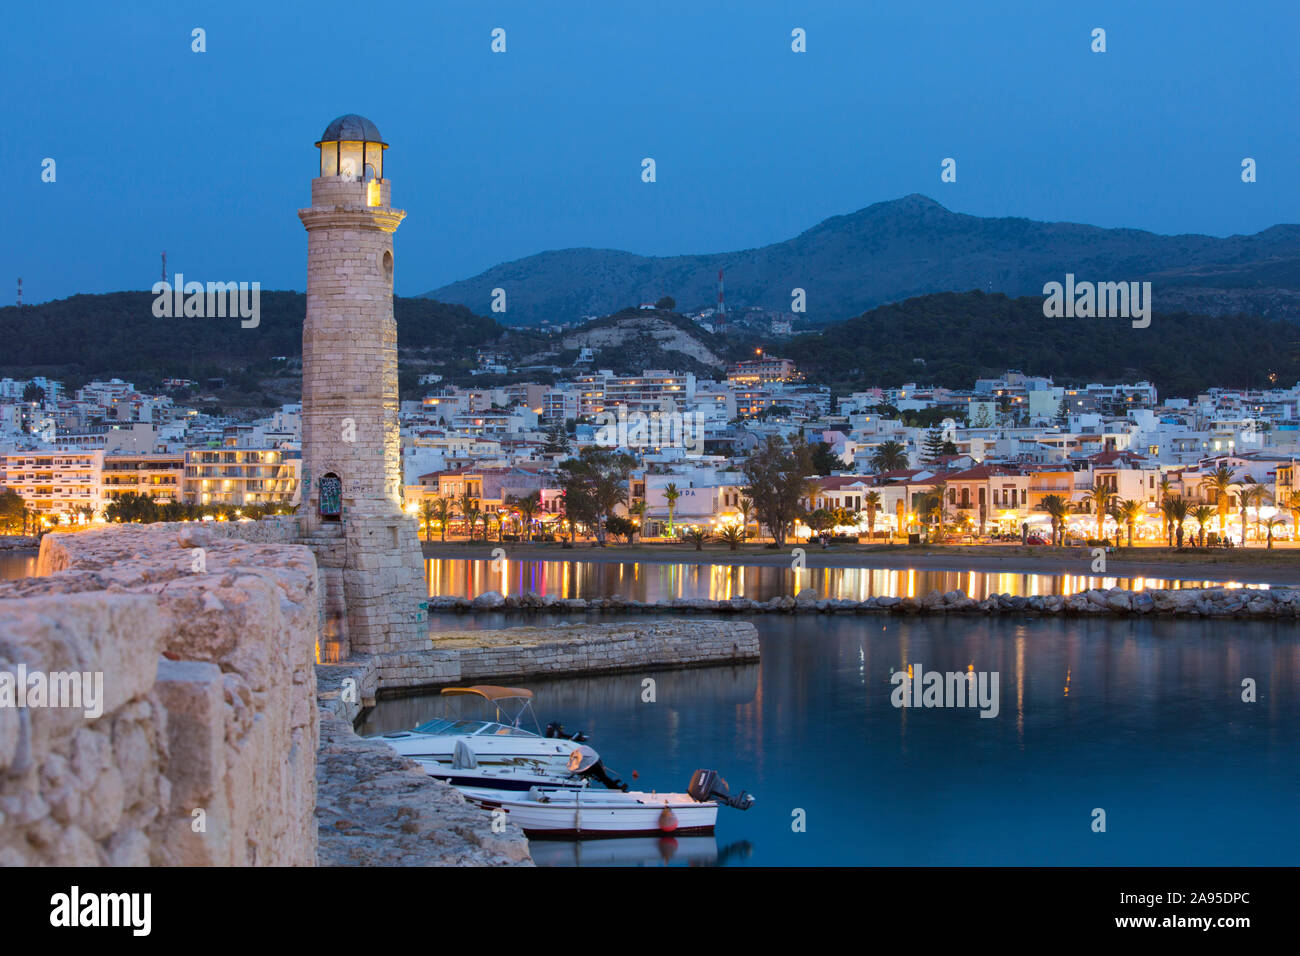 Rethymno, Crete, Greece. View along wall of the Venetian Harbour to illuminated 16th century Turkish lighthouse, dusk. Stock Photo